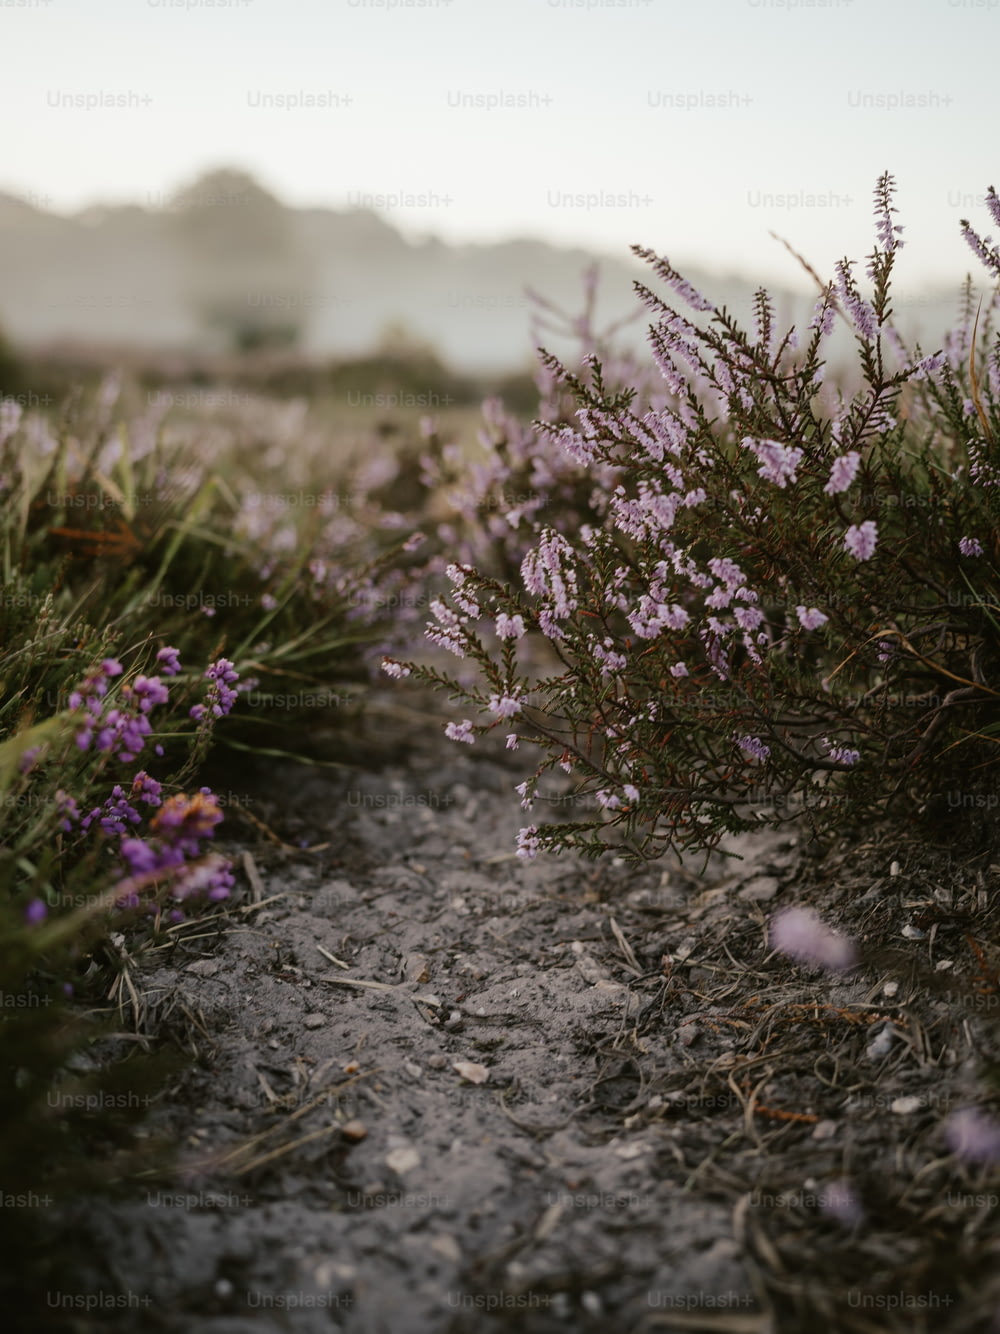 a dirt path with purple flowers growing on it